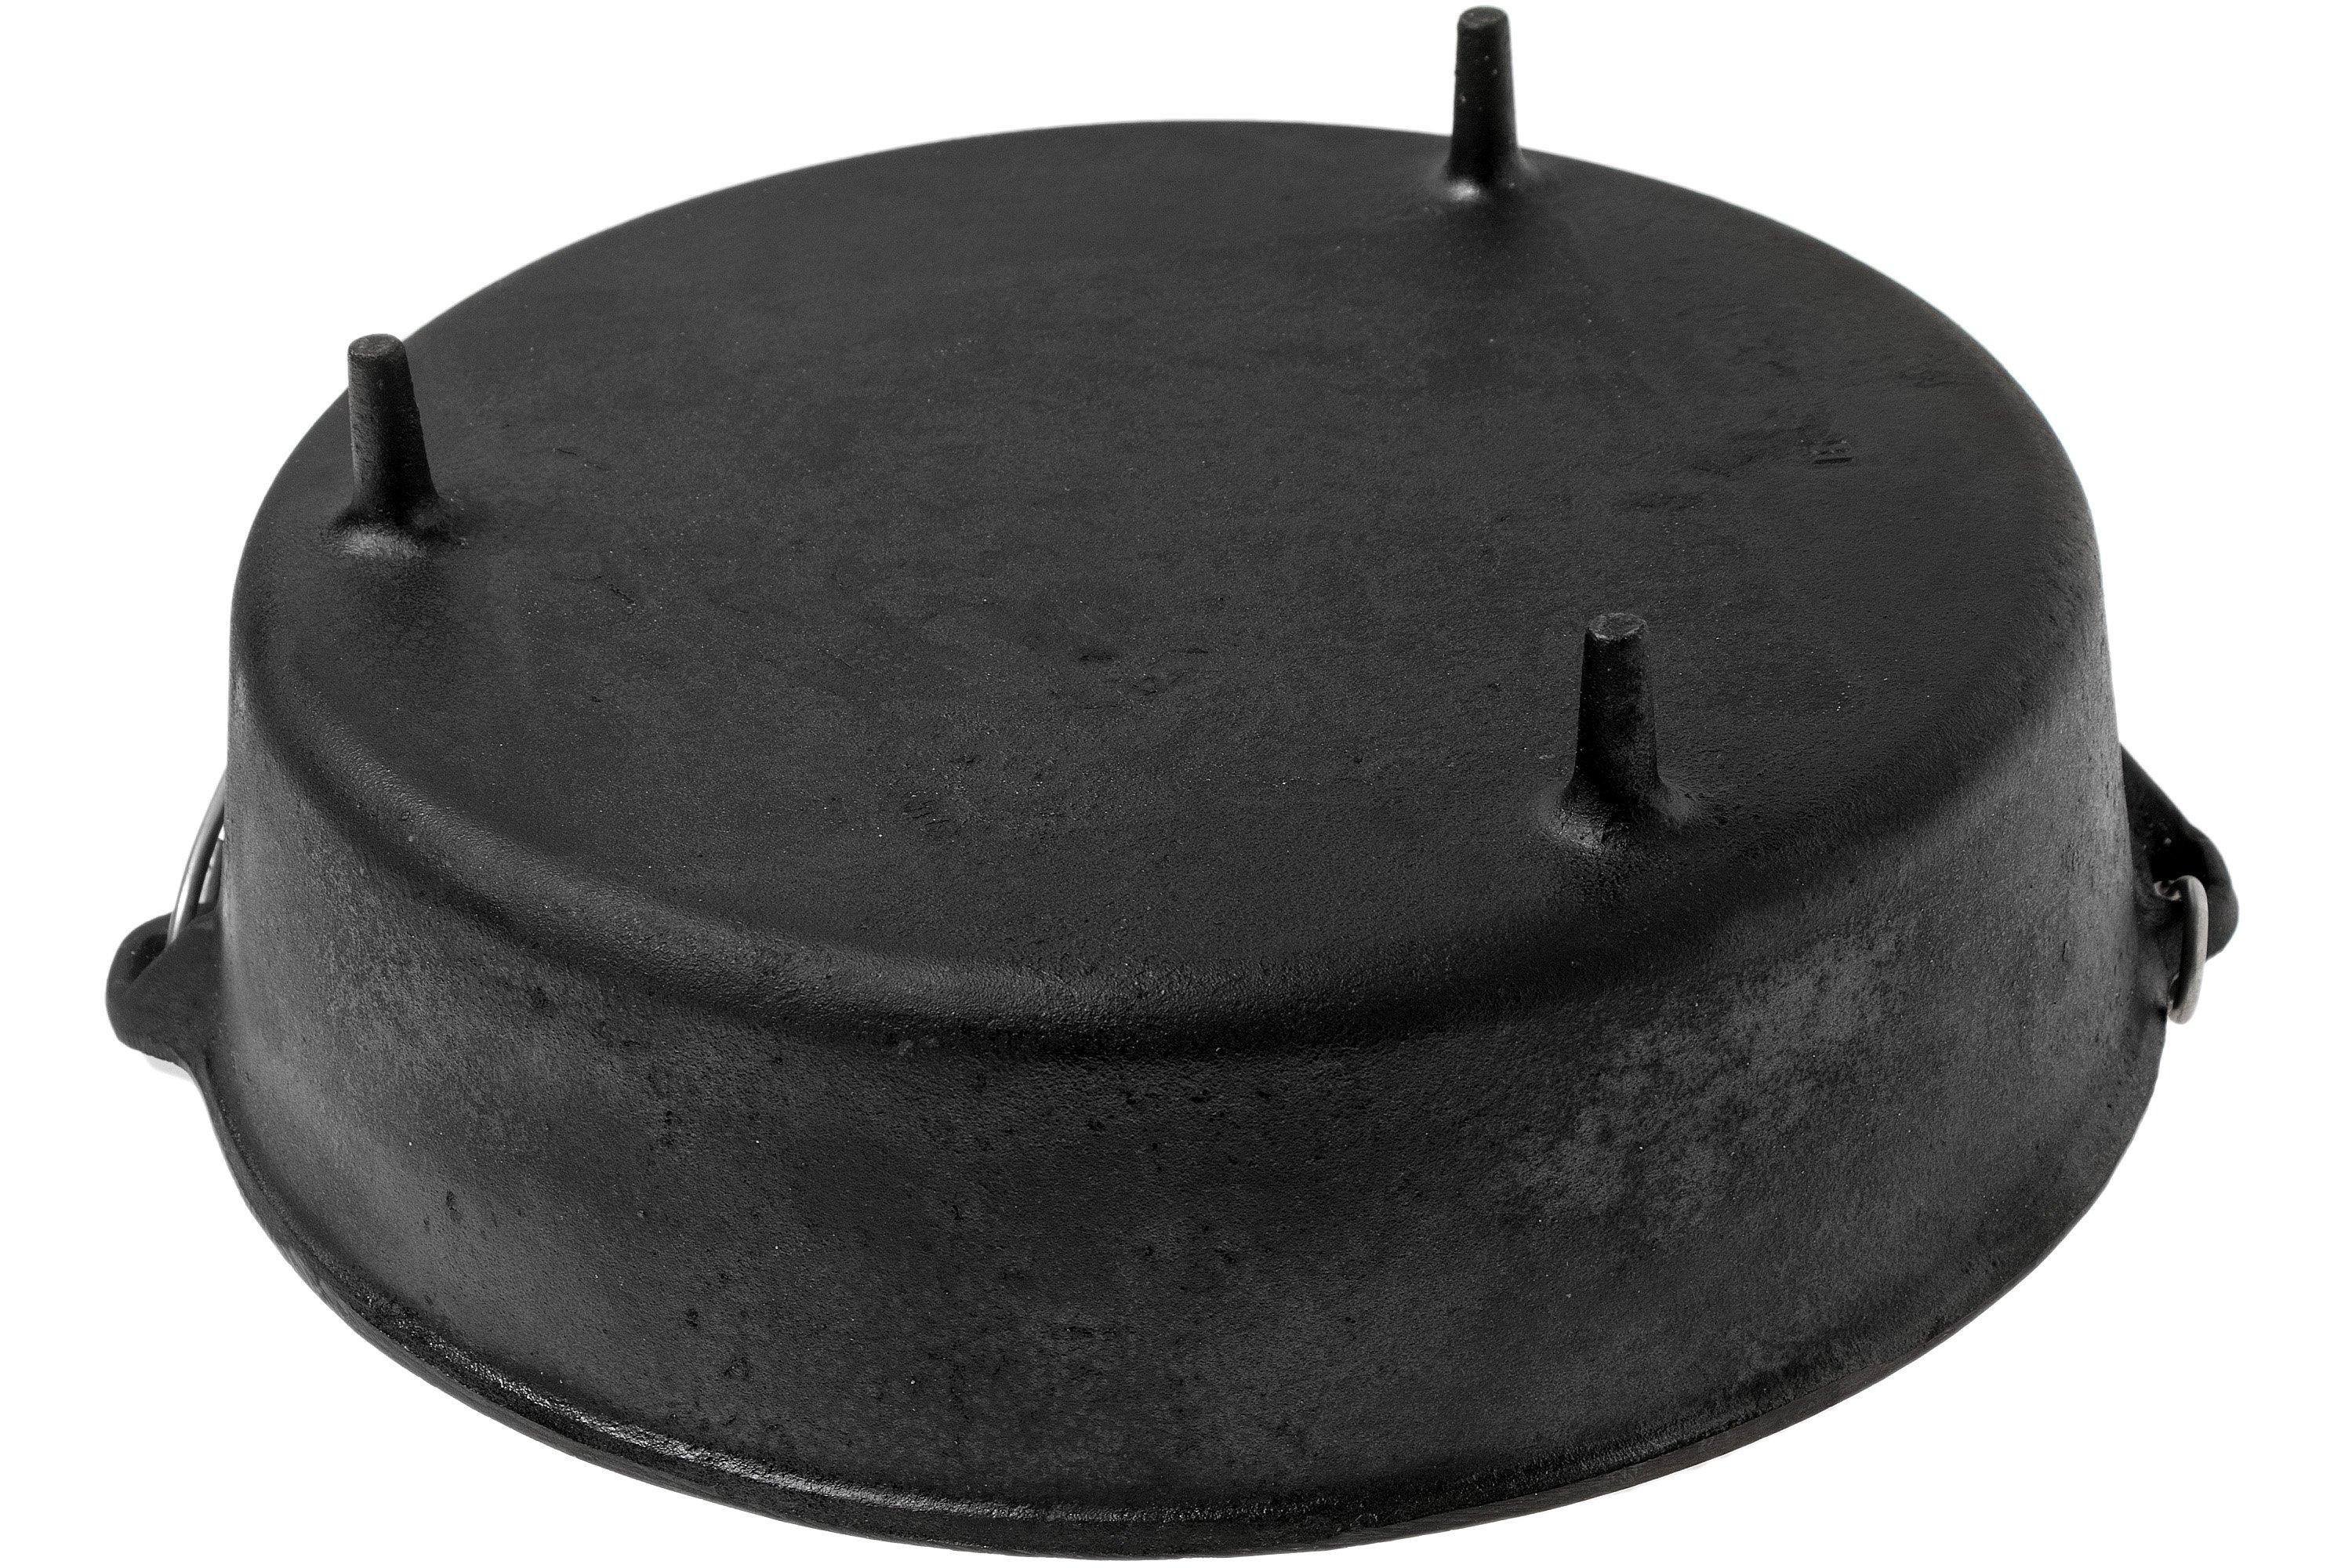 Camp Chef 16" Classic Dutch Oven Advantageously shopping at